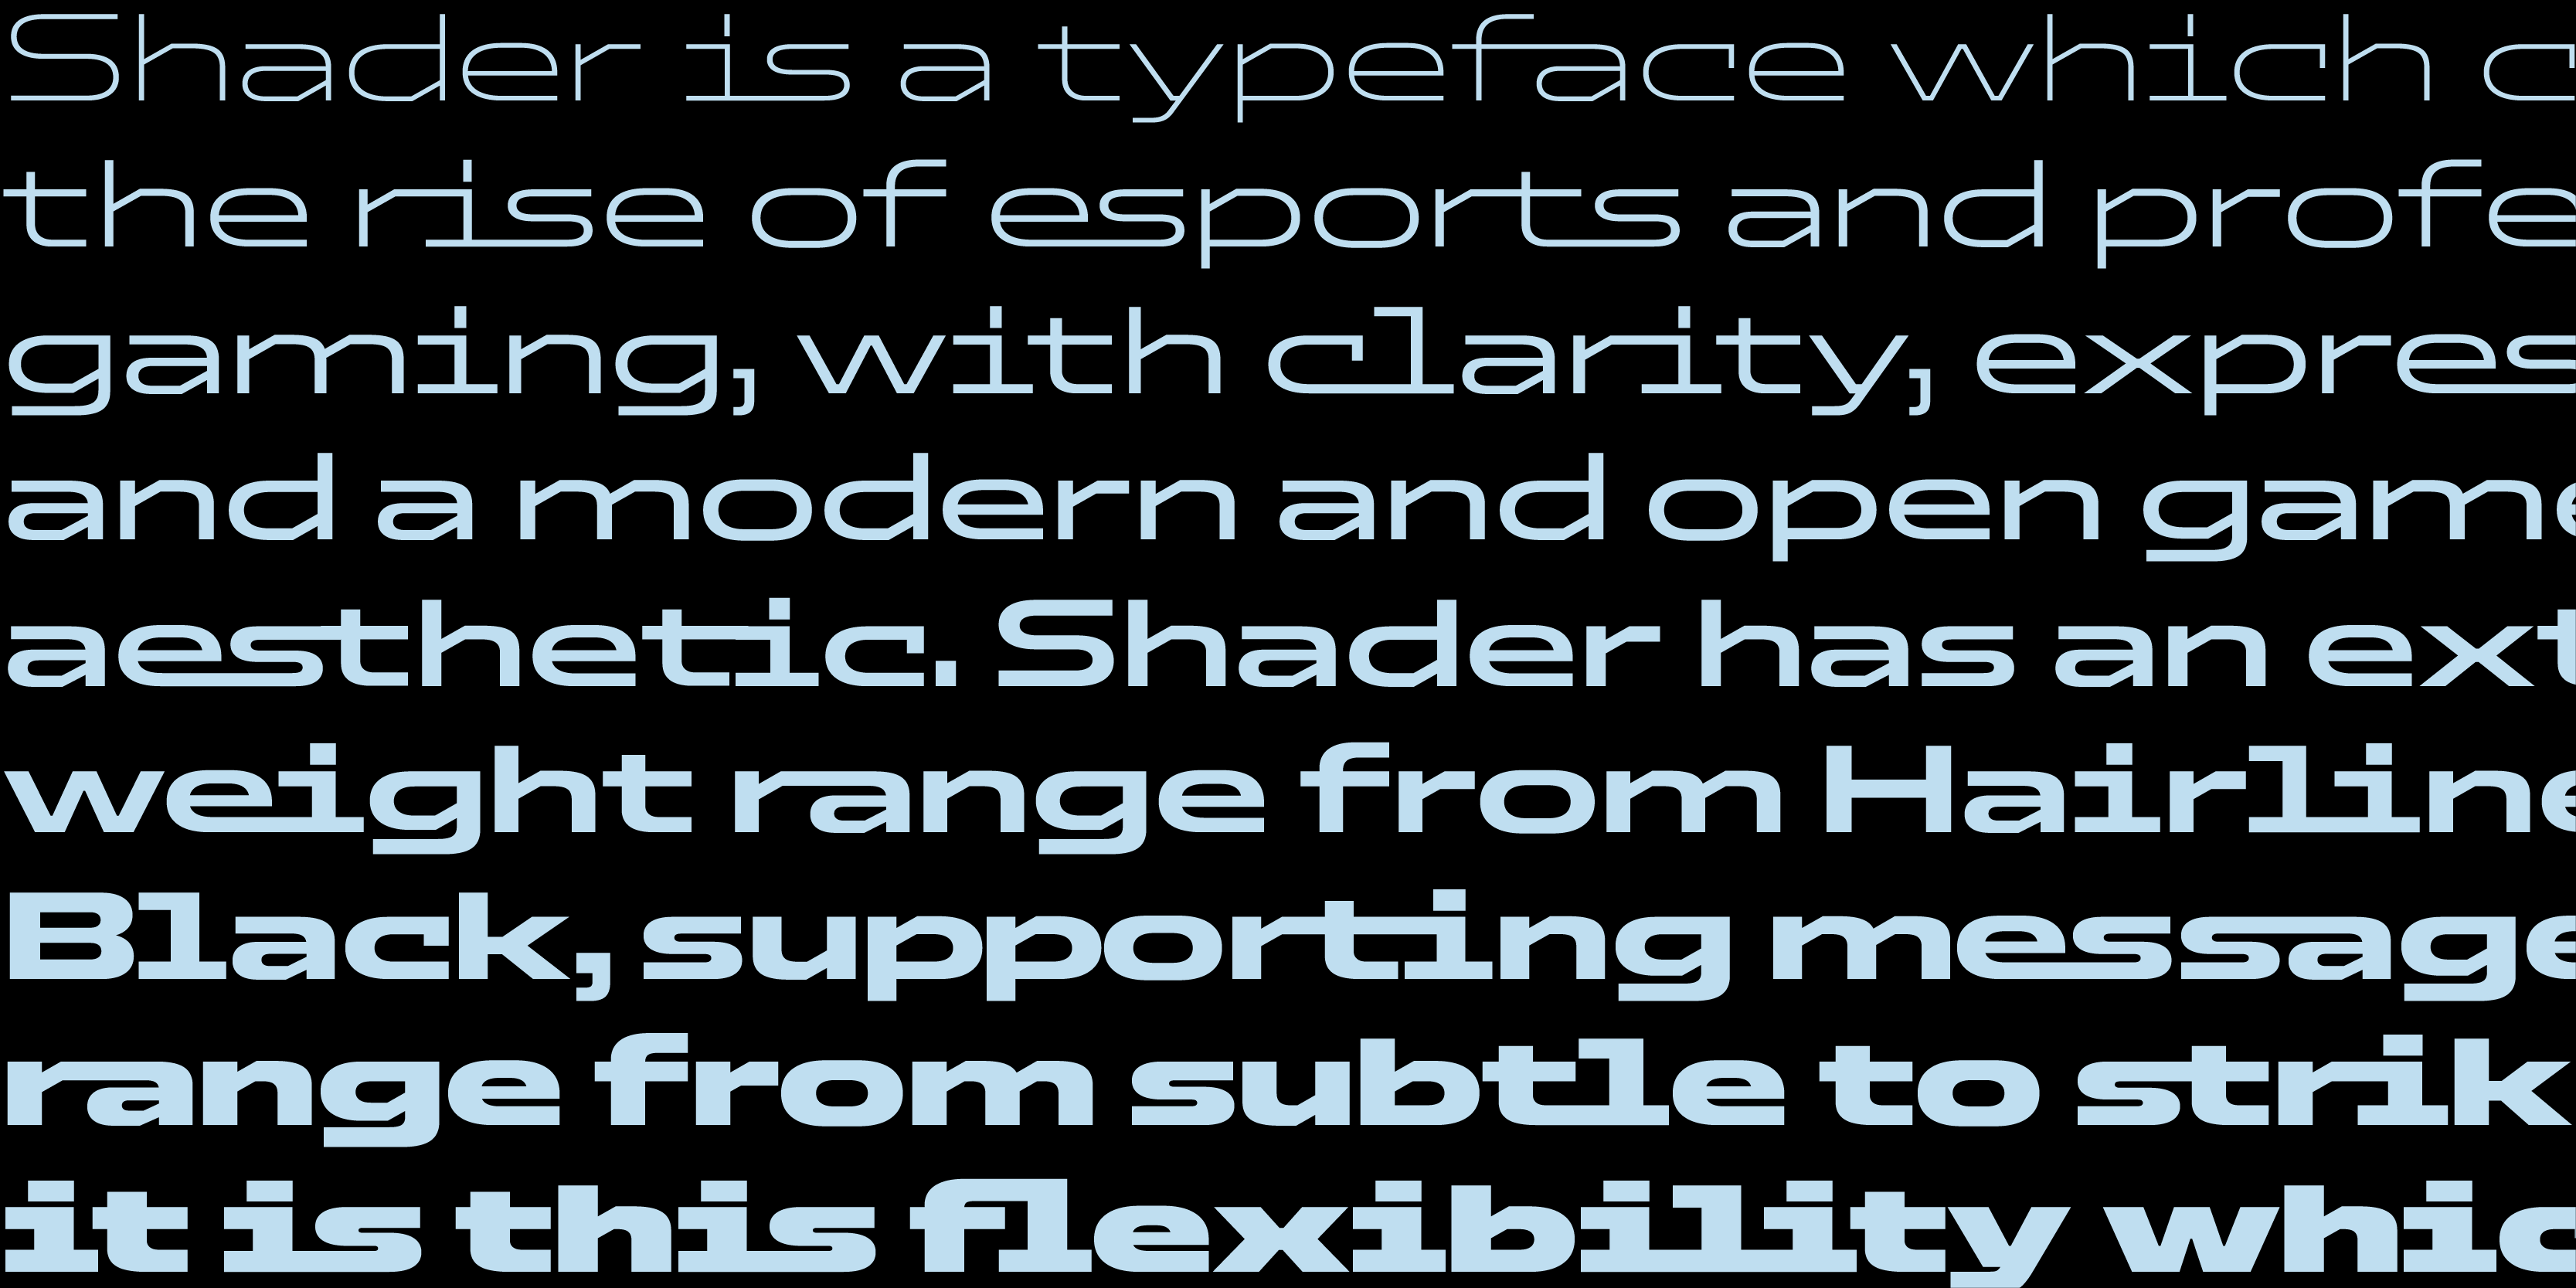 Card displaying Shader typeface in various styles